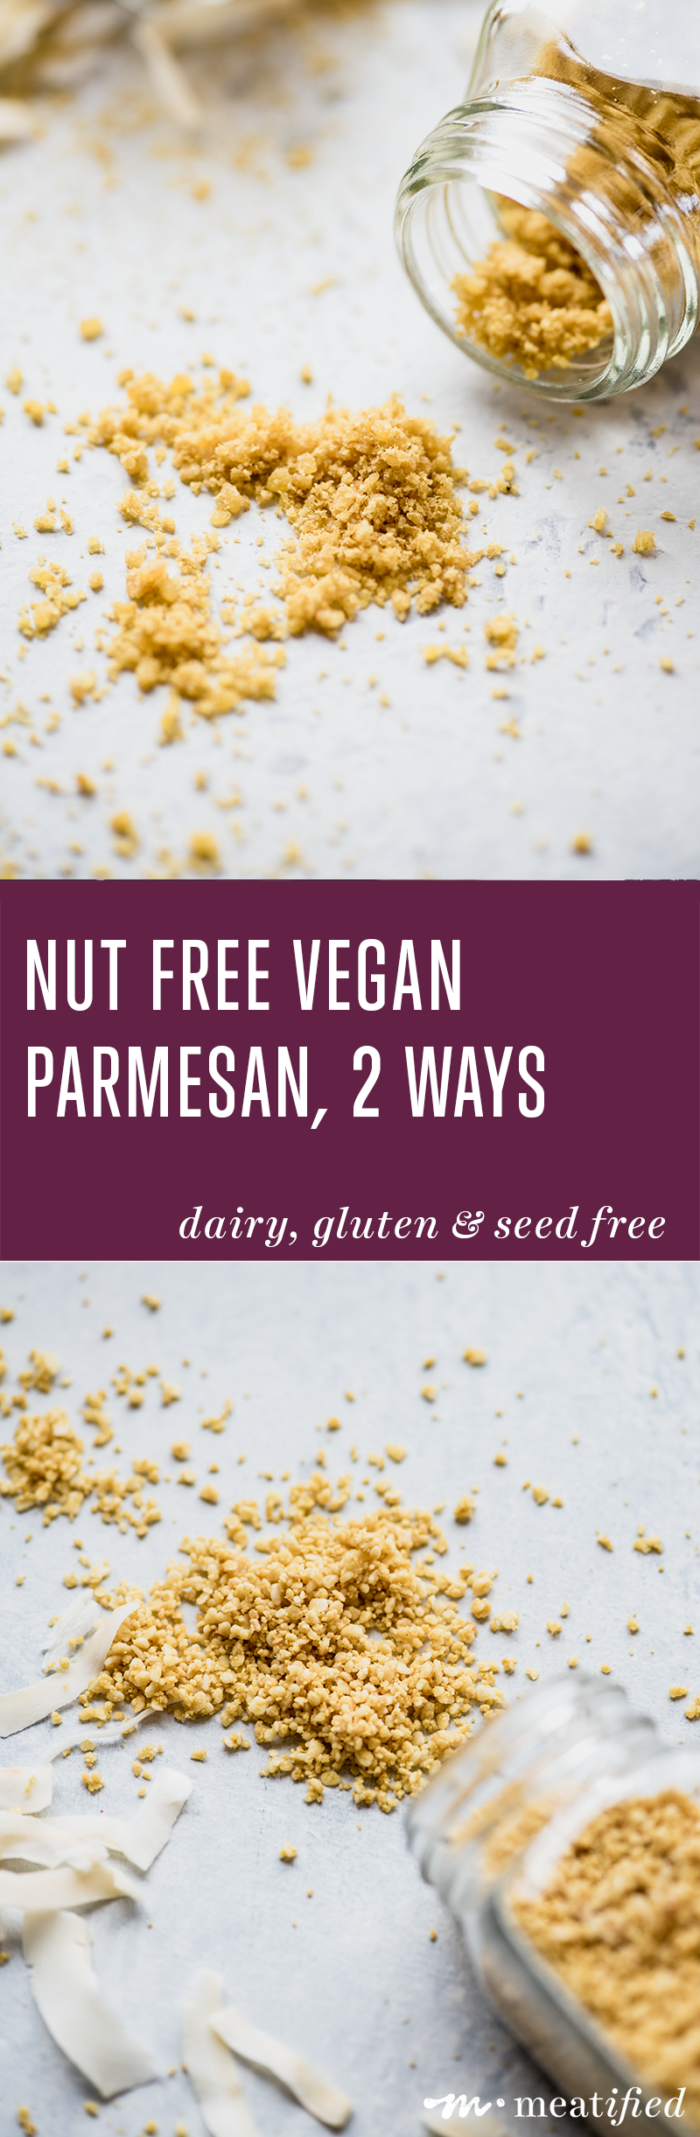 A twist on the classic "nooch & nut" combo, these nut free vegan parmesan sprinkles from http://meatified.com are perfect on salads, soups & anywhere you used to enjoy grated parm!